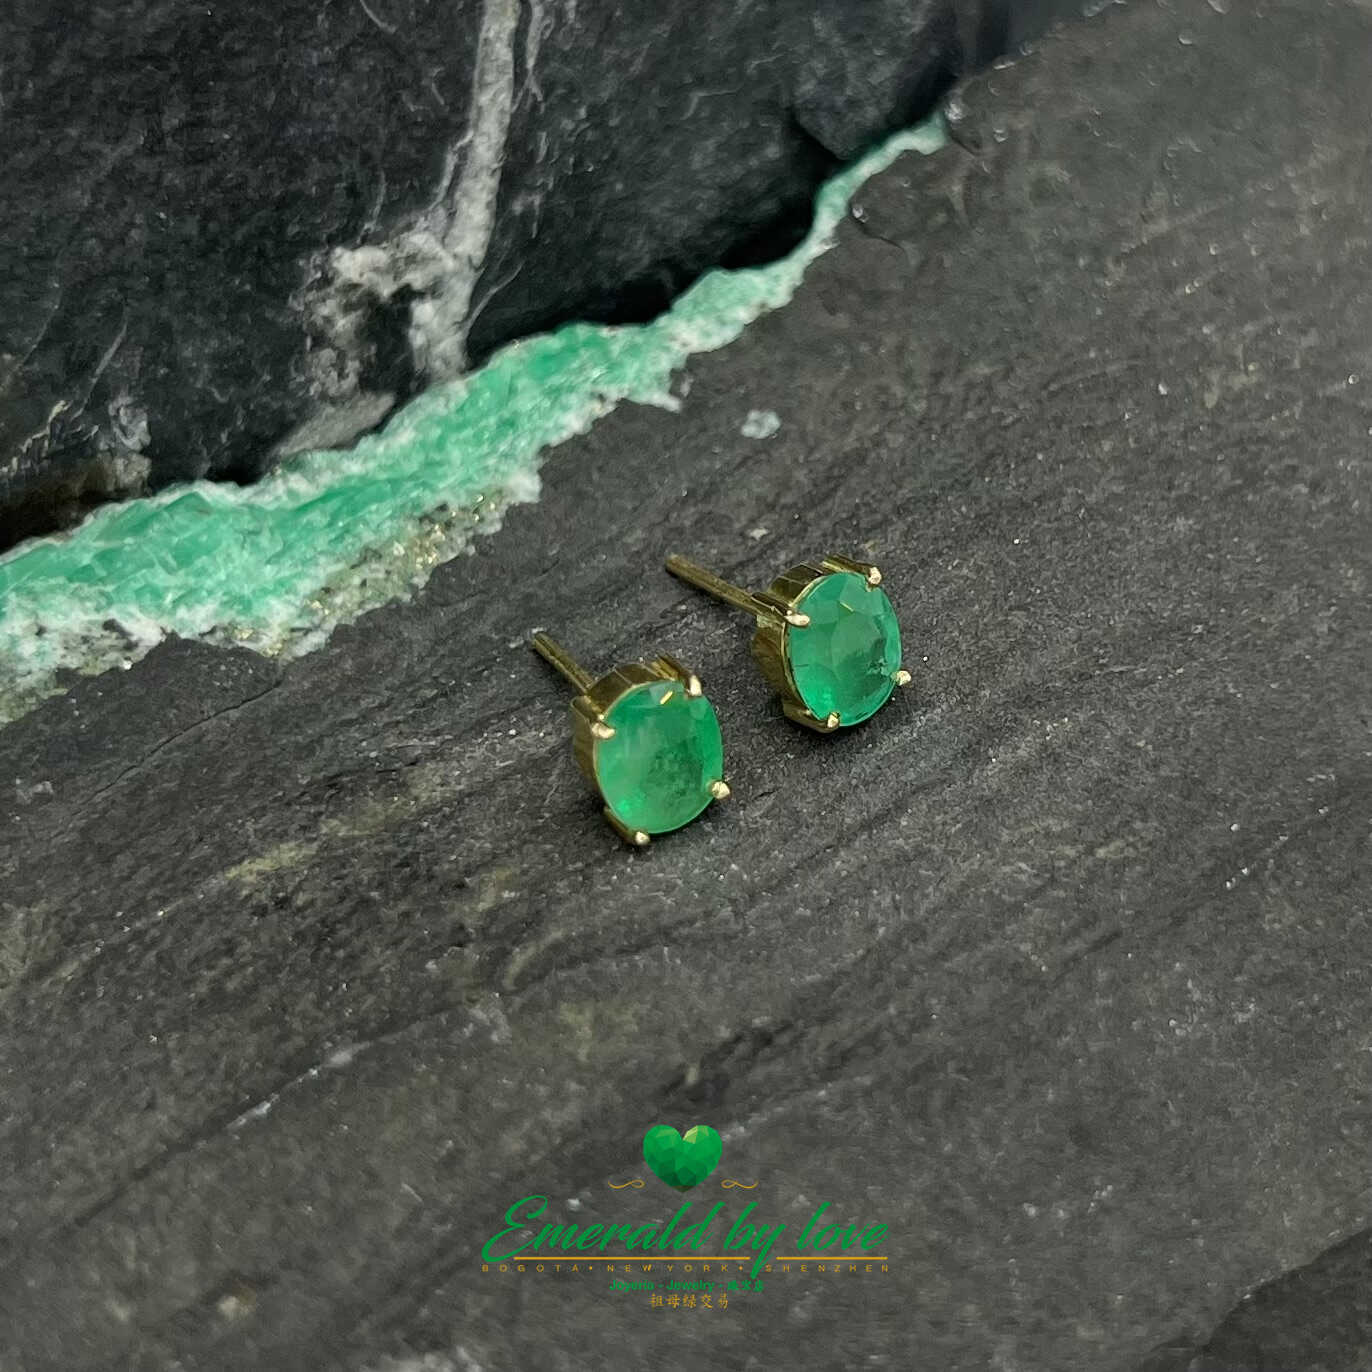 Timeless Radiance: Yellow Gold Oval Emerald Earrings 4.62 TCW